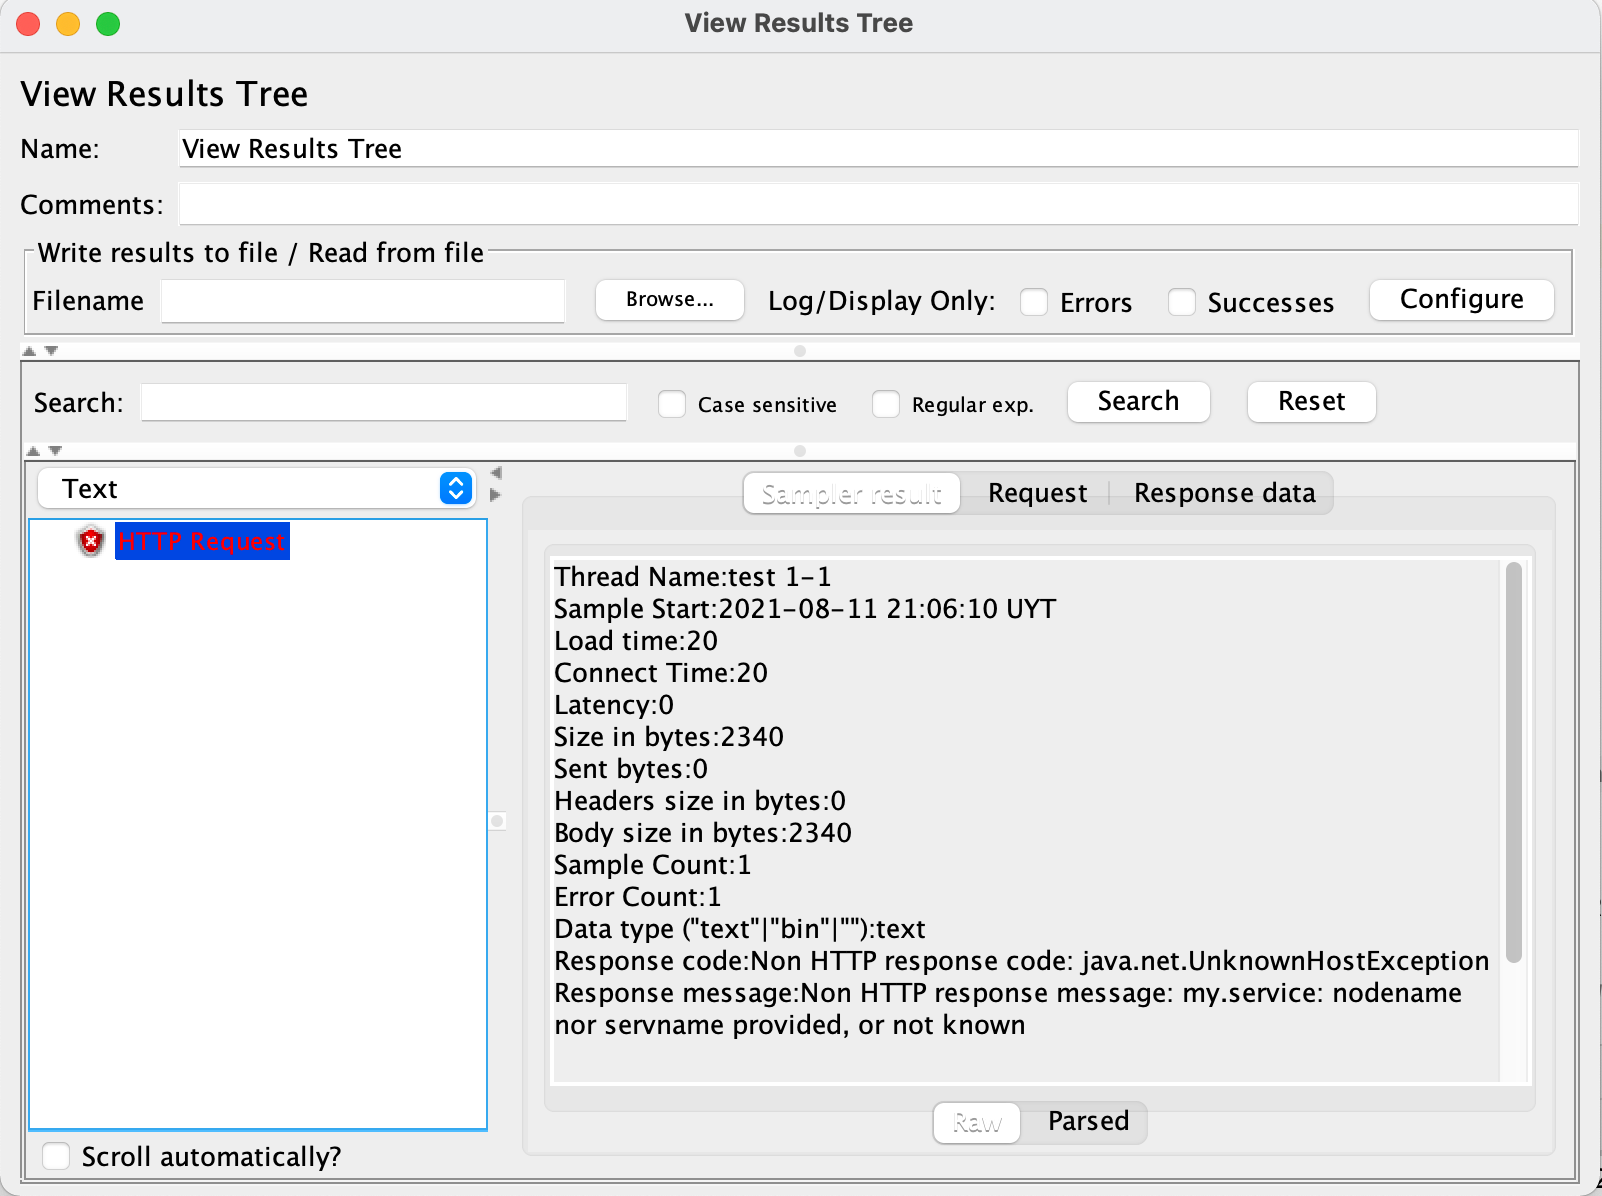 View Results Tree GUI